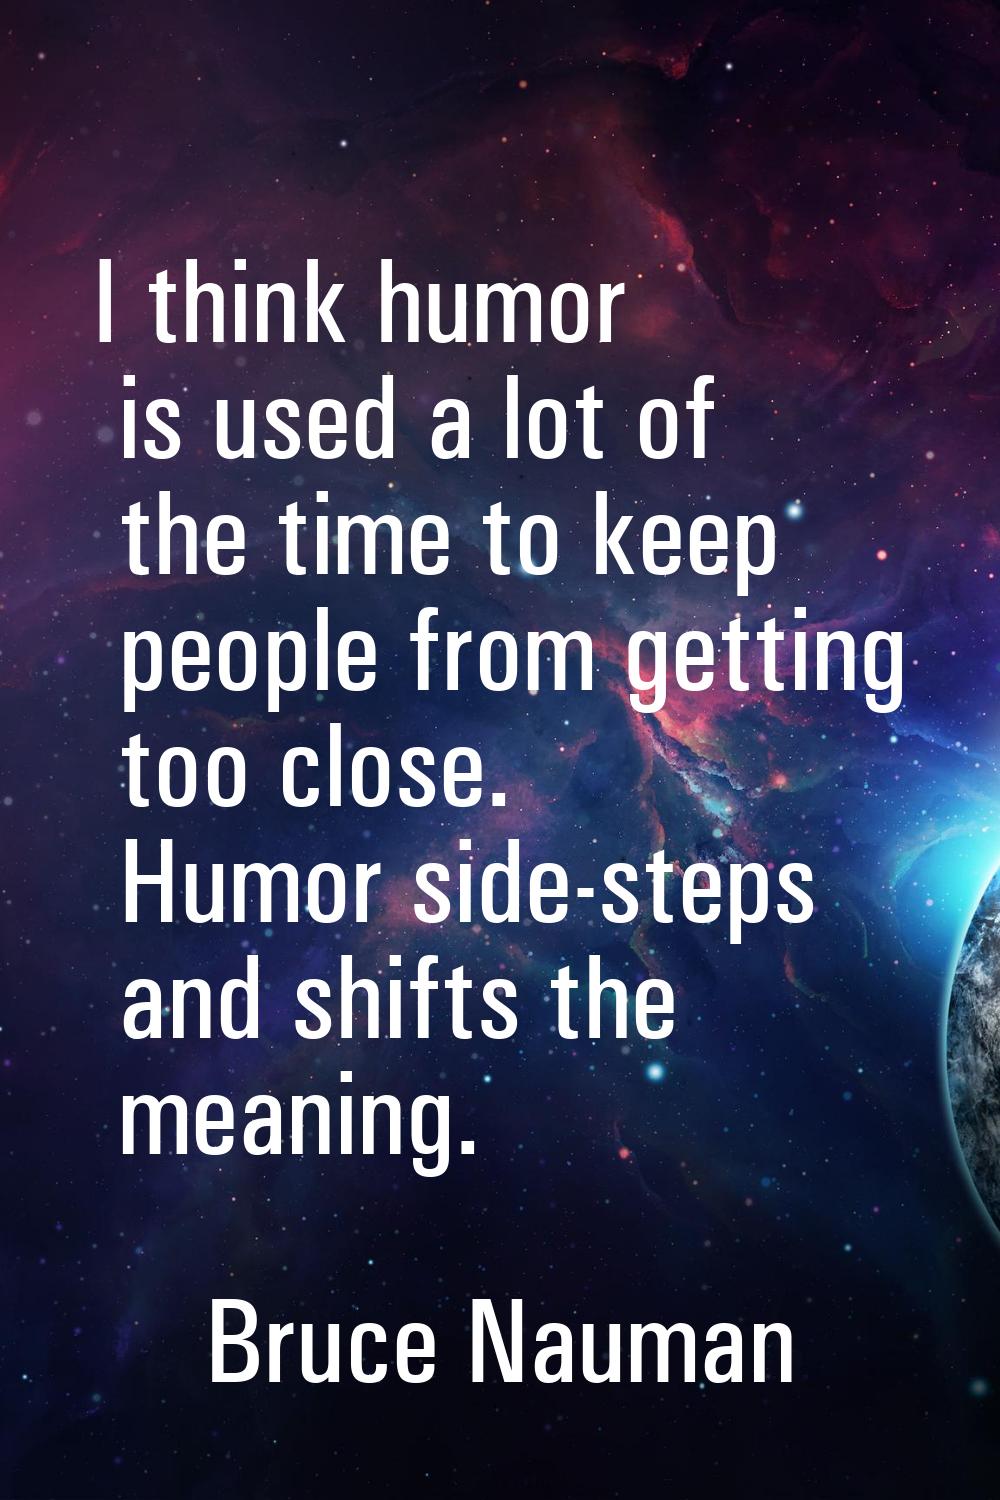 I think humor is used a lot of the time to keep people from getting too close. Humor side-steps and